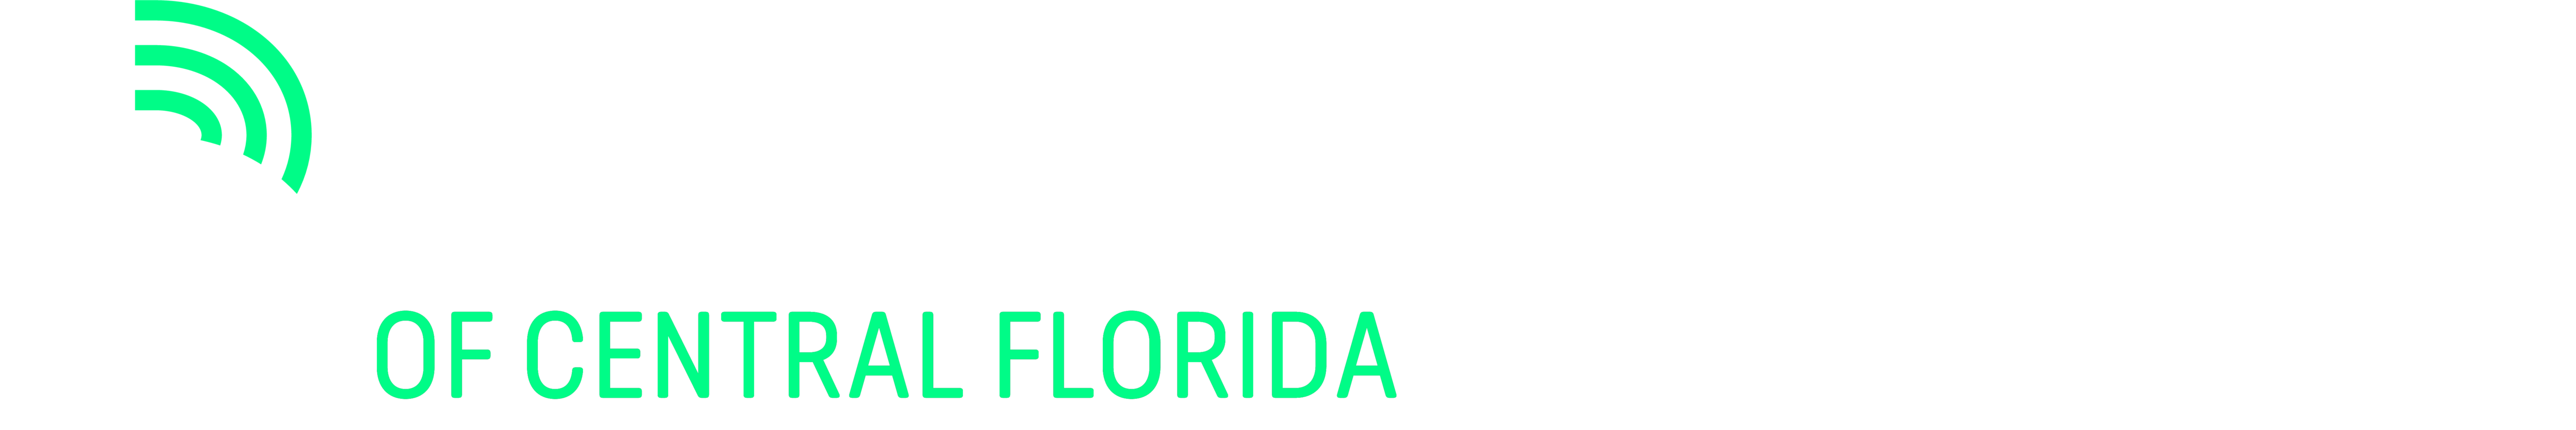 Big Brothers Big Sisters of Central Florida